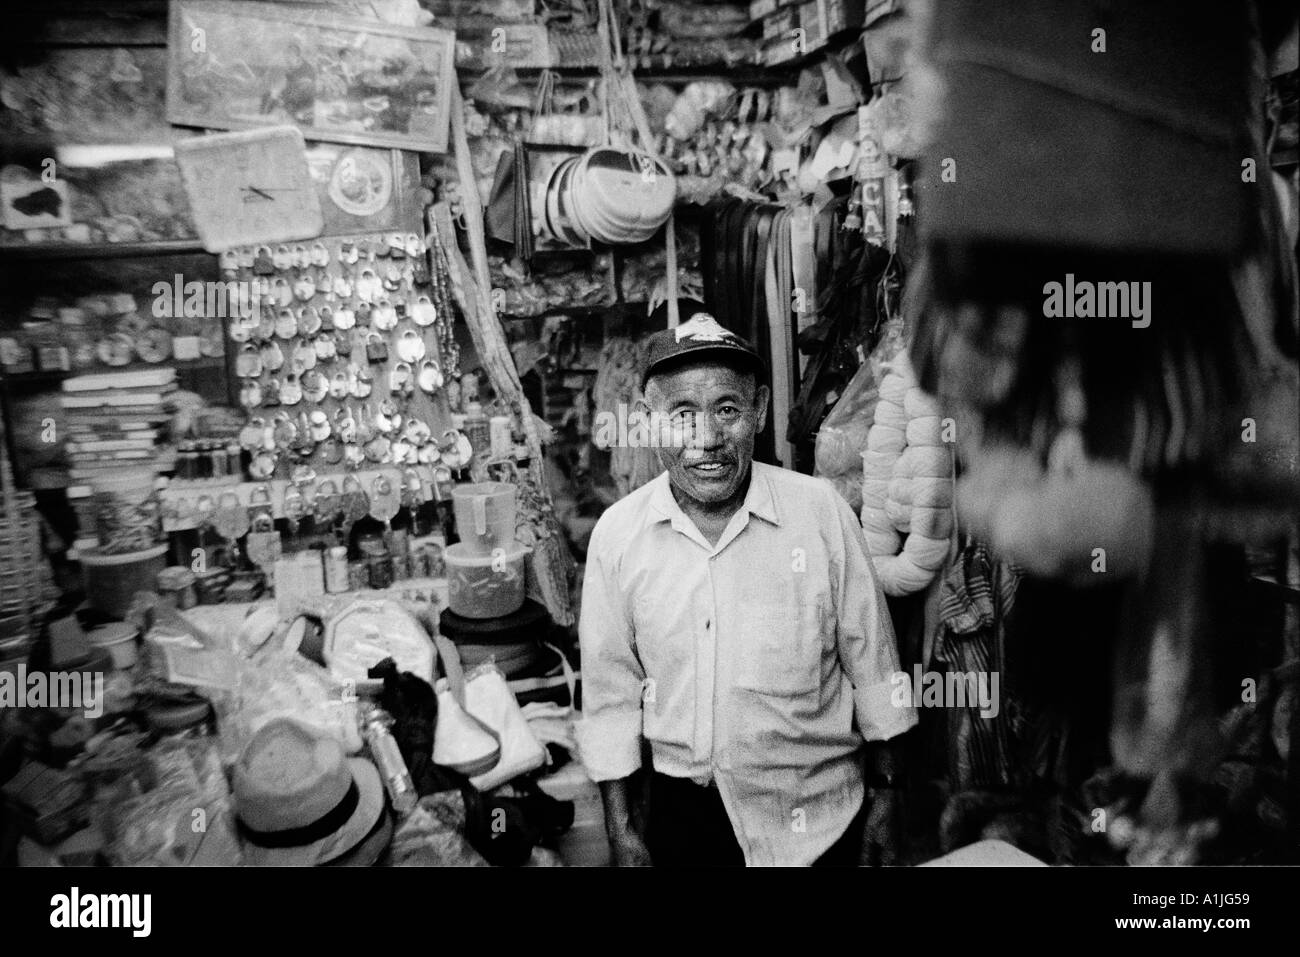 India shop owner Black and White Stock Photos & Images - Alamy